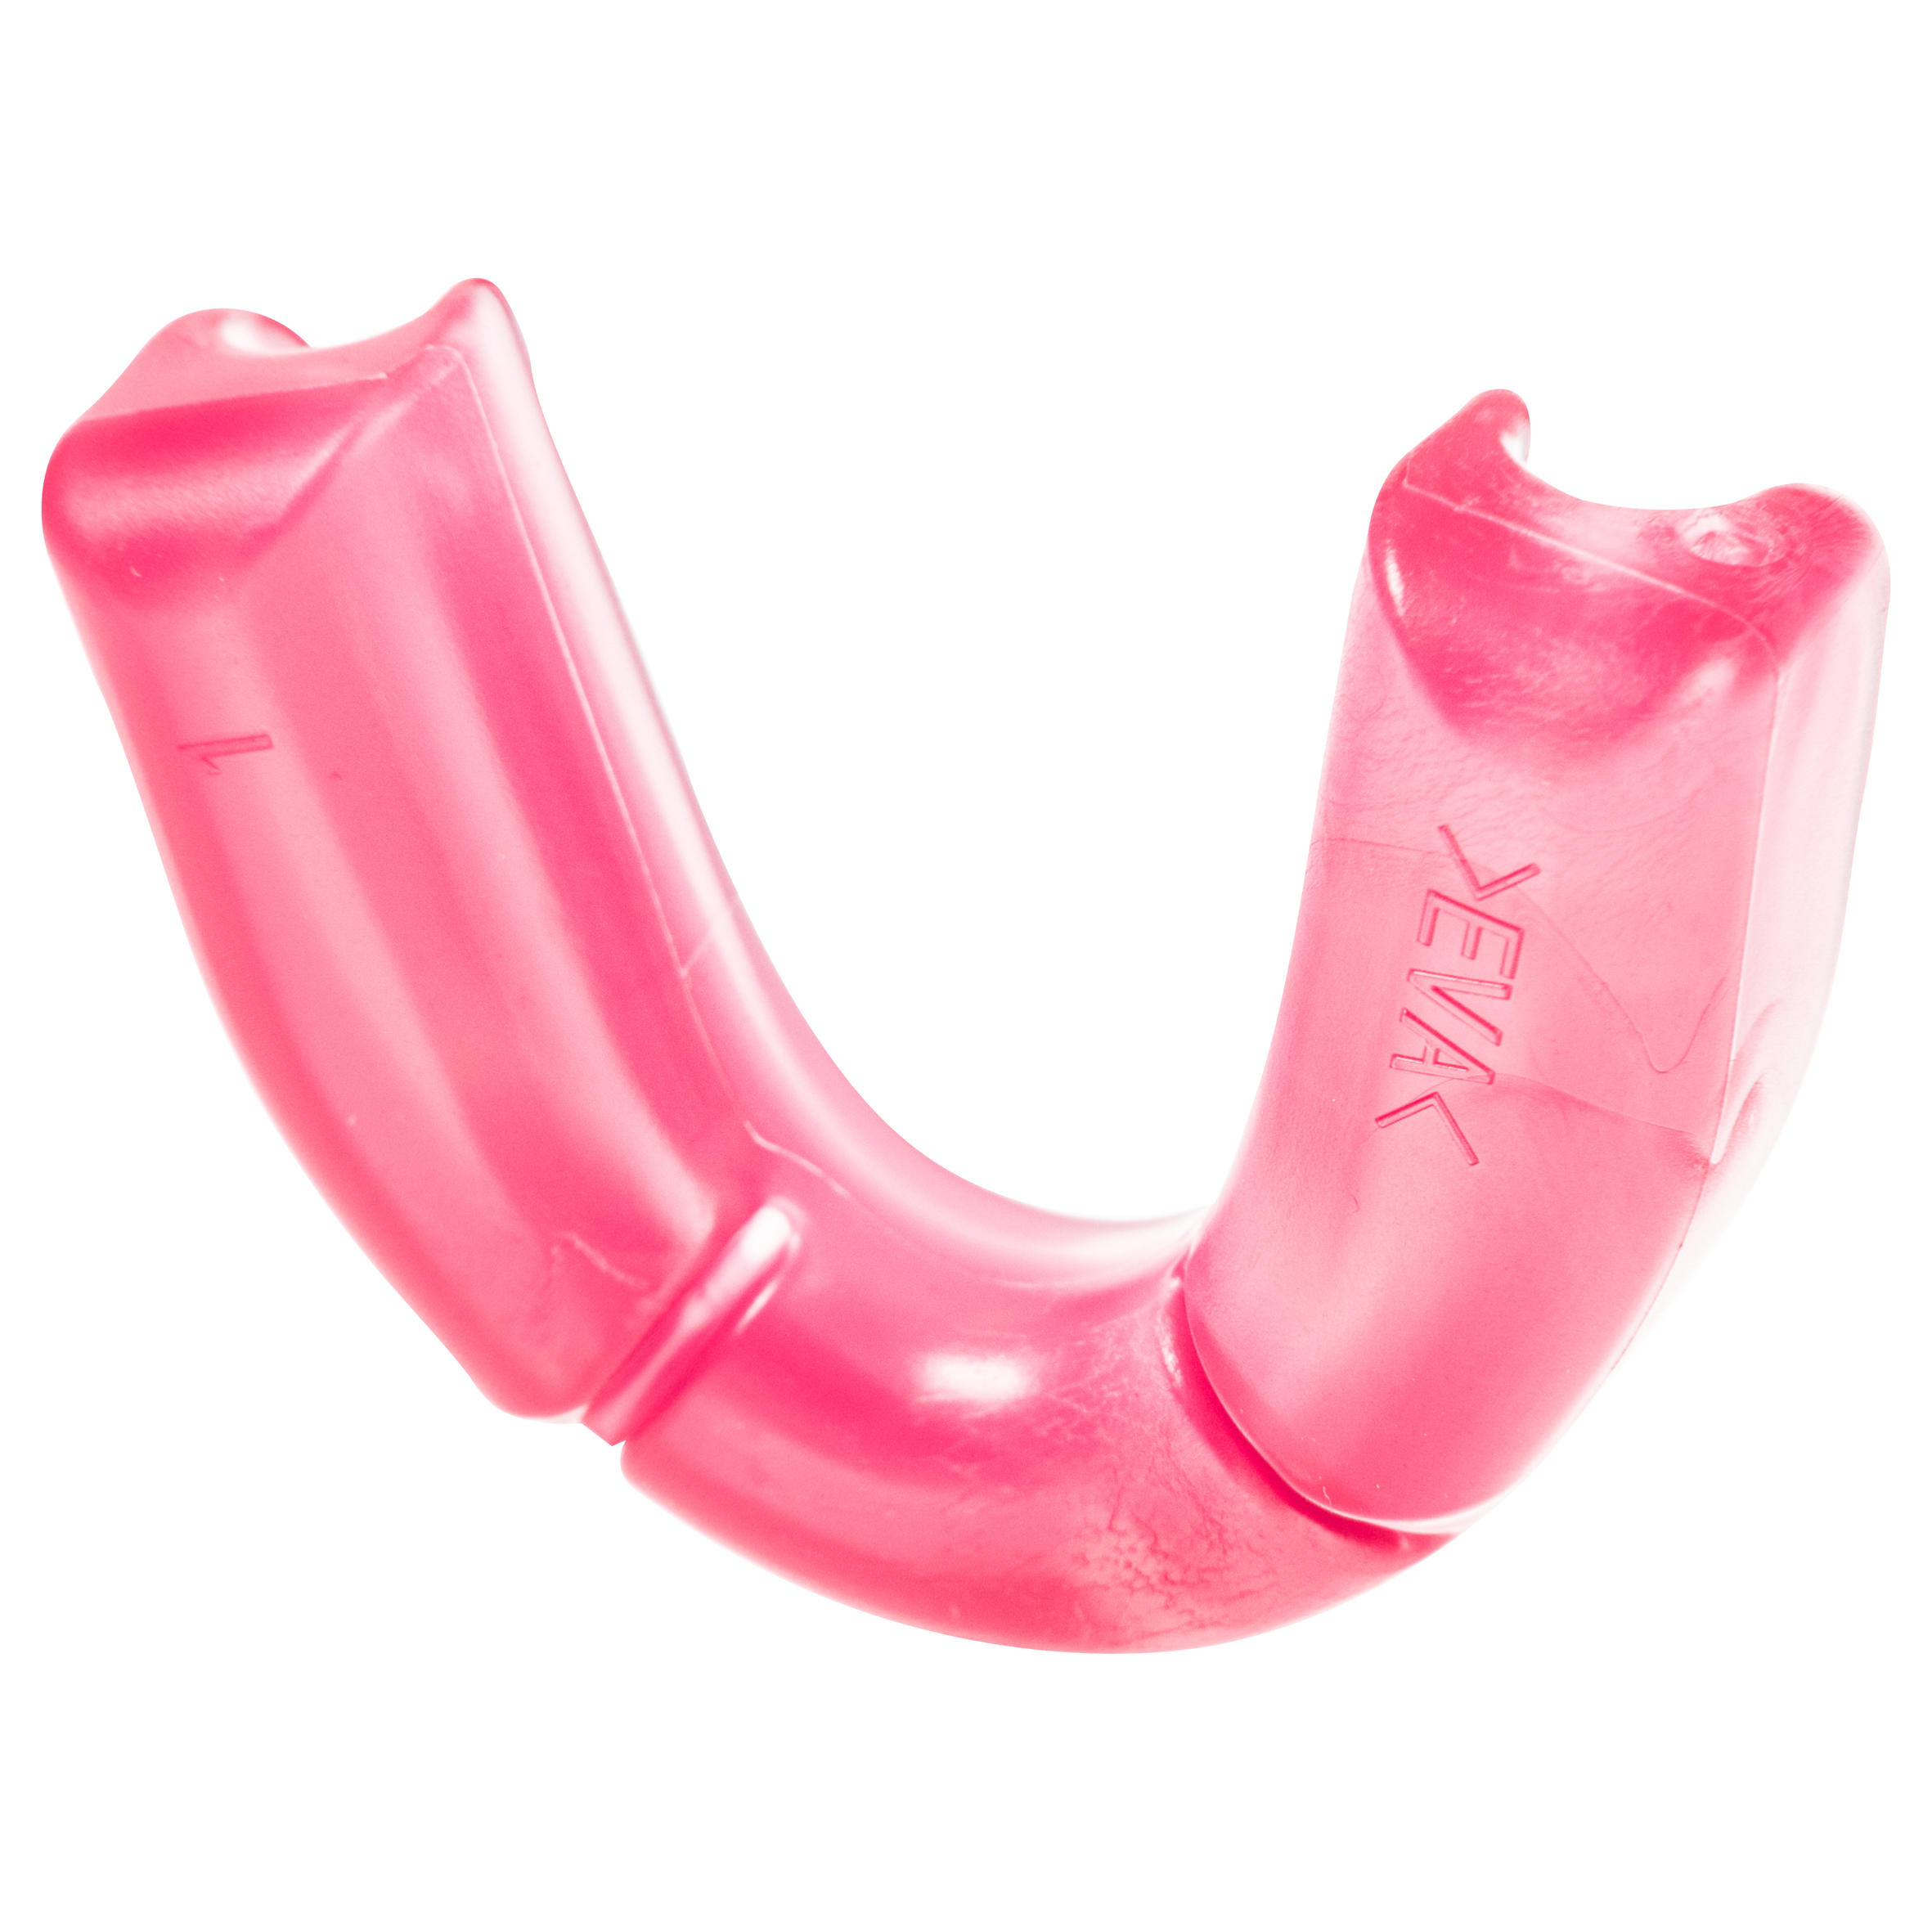 Kids' Low Intensity Field Hockey Mouthguard Size Small FH100 - Pink 6/11